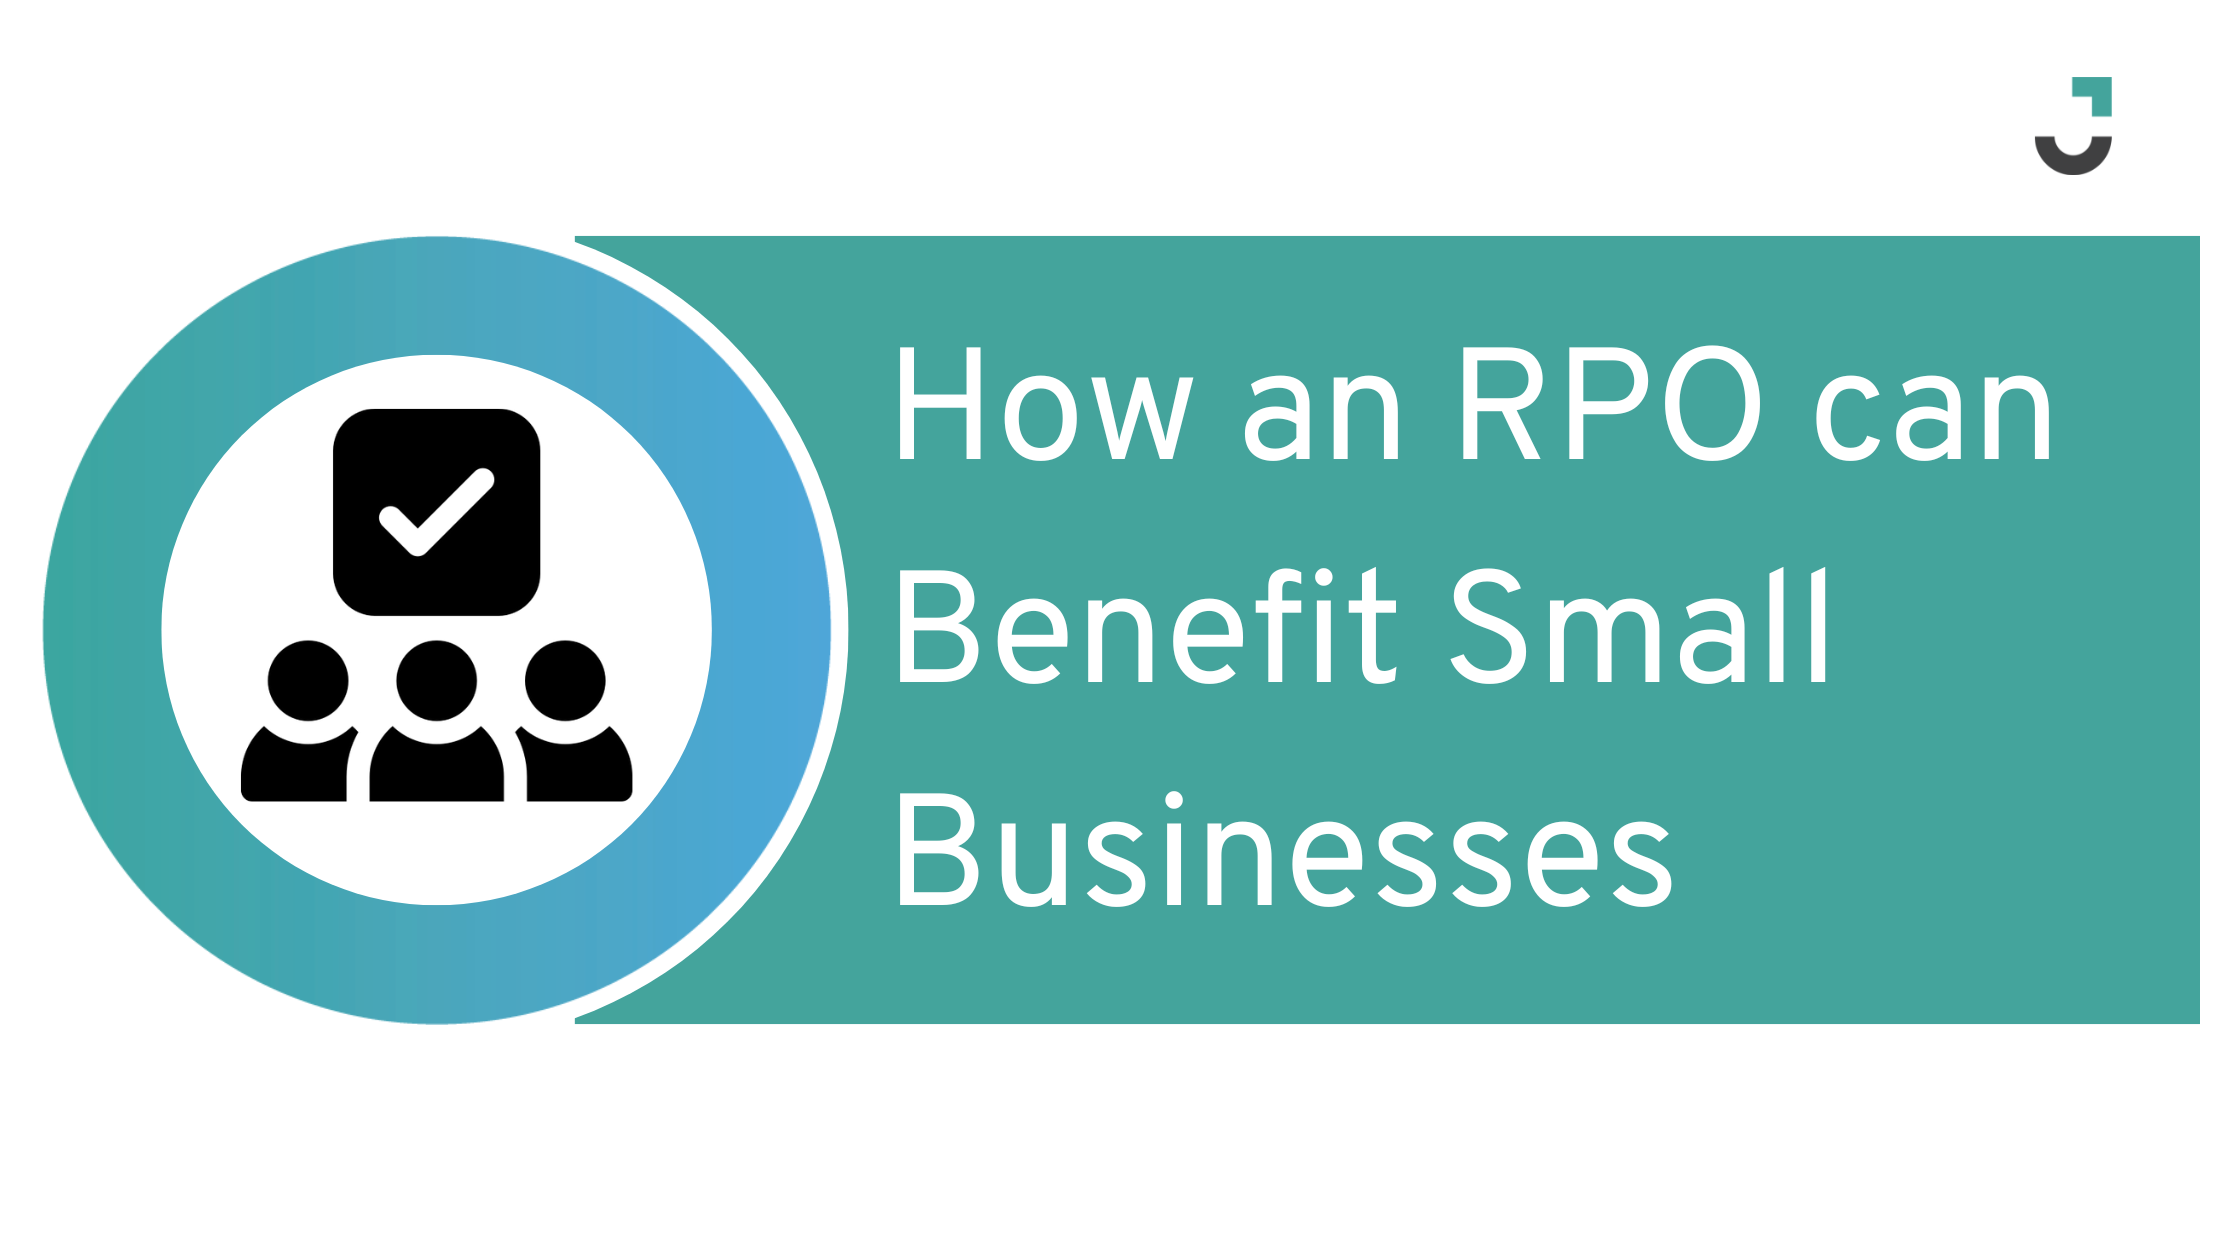 How an RPO can Benefit Small Businesses